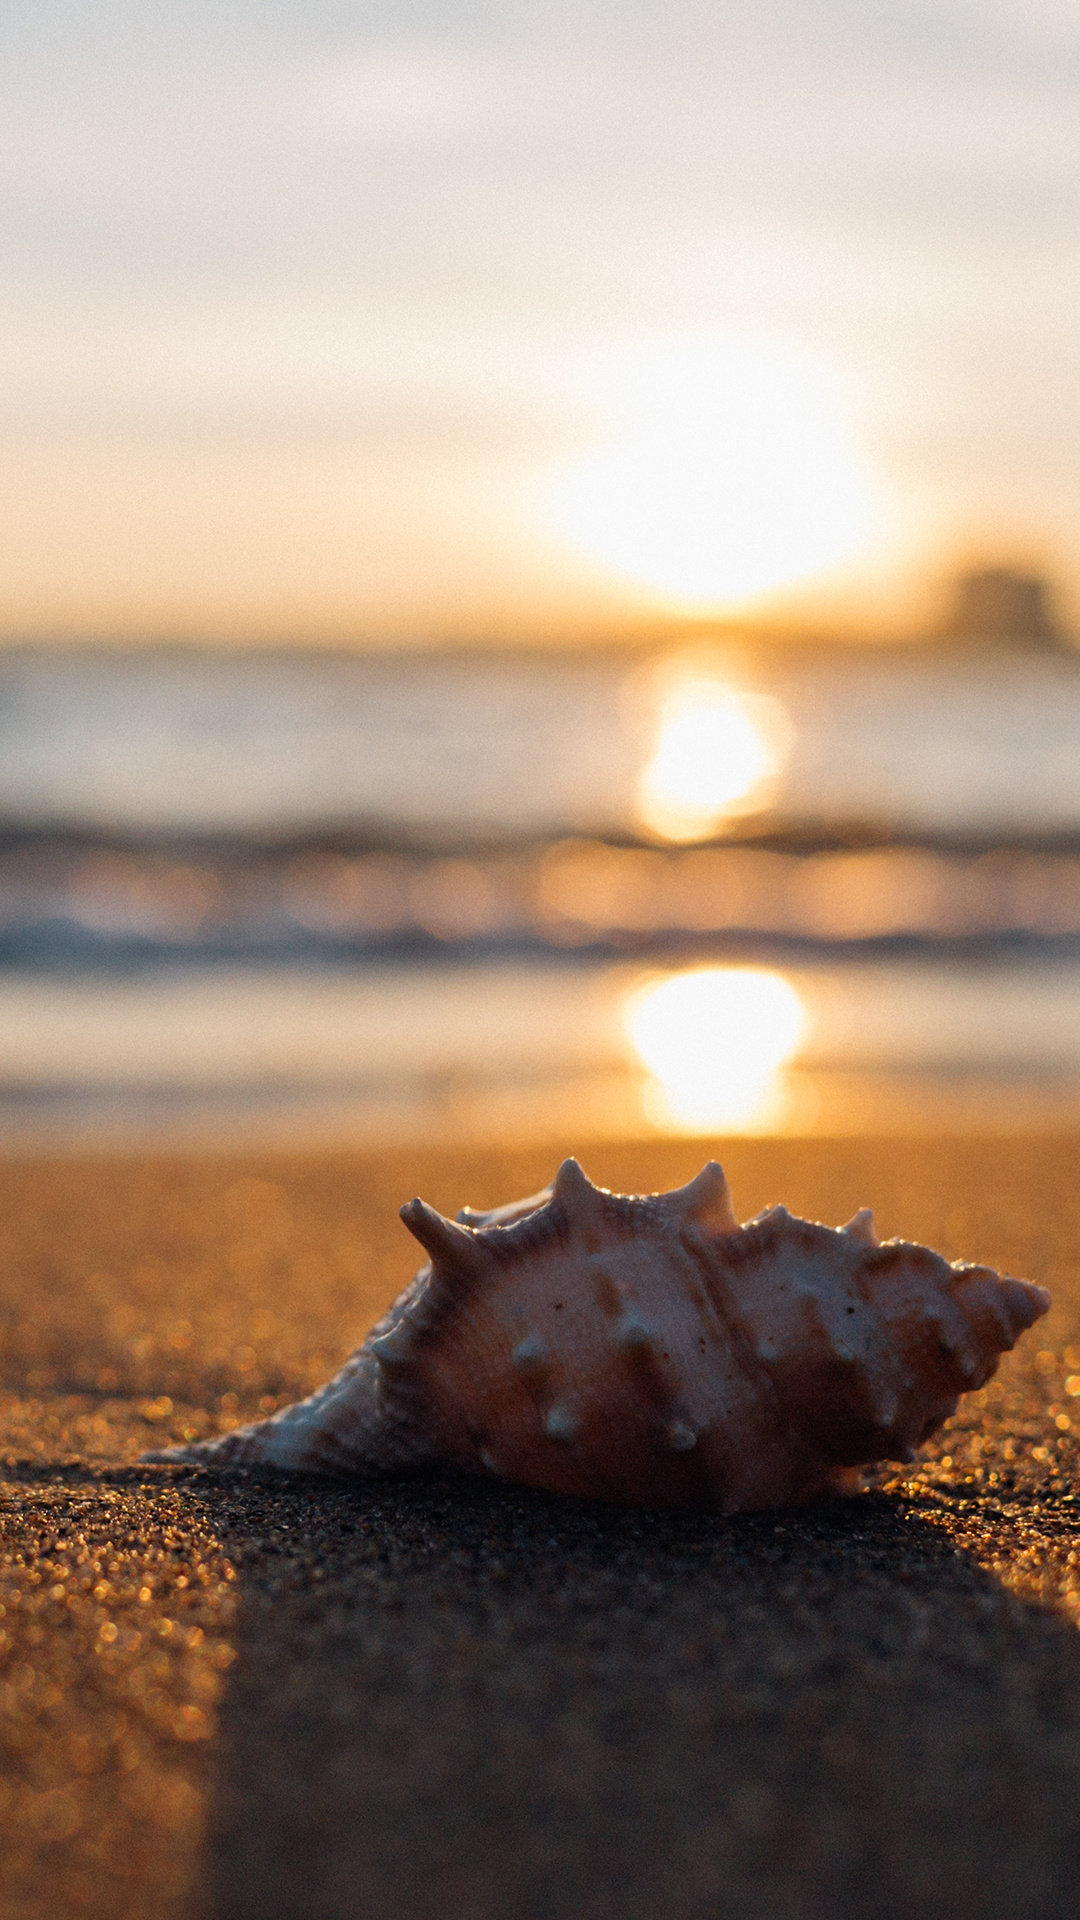 Sea Shell: The homes for the hermit crabs, Beach, Coast, Island. 1080x1920 Full HD Background.